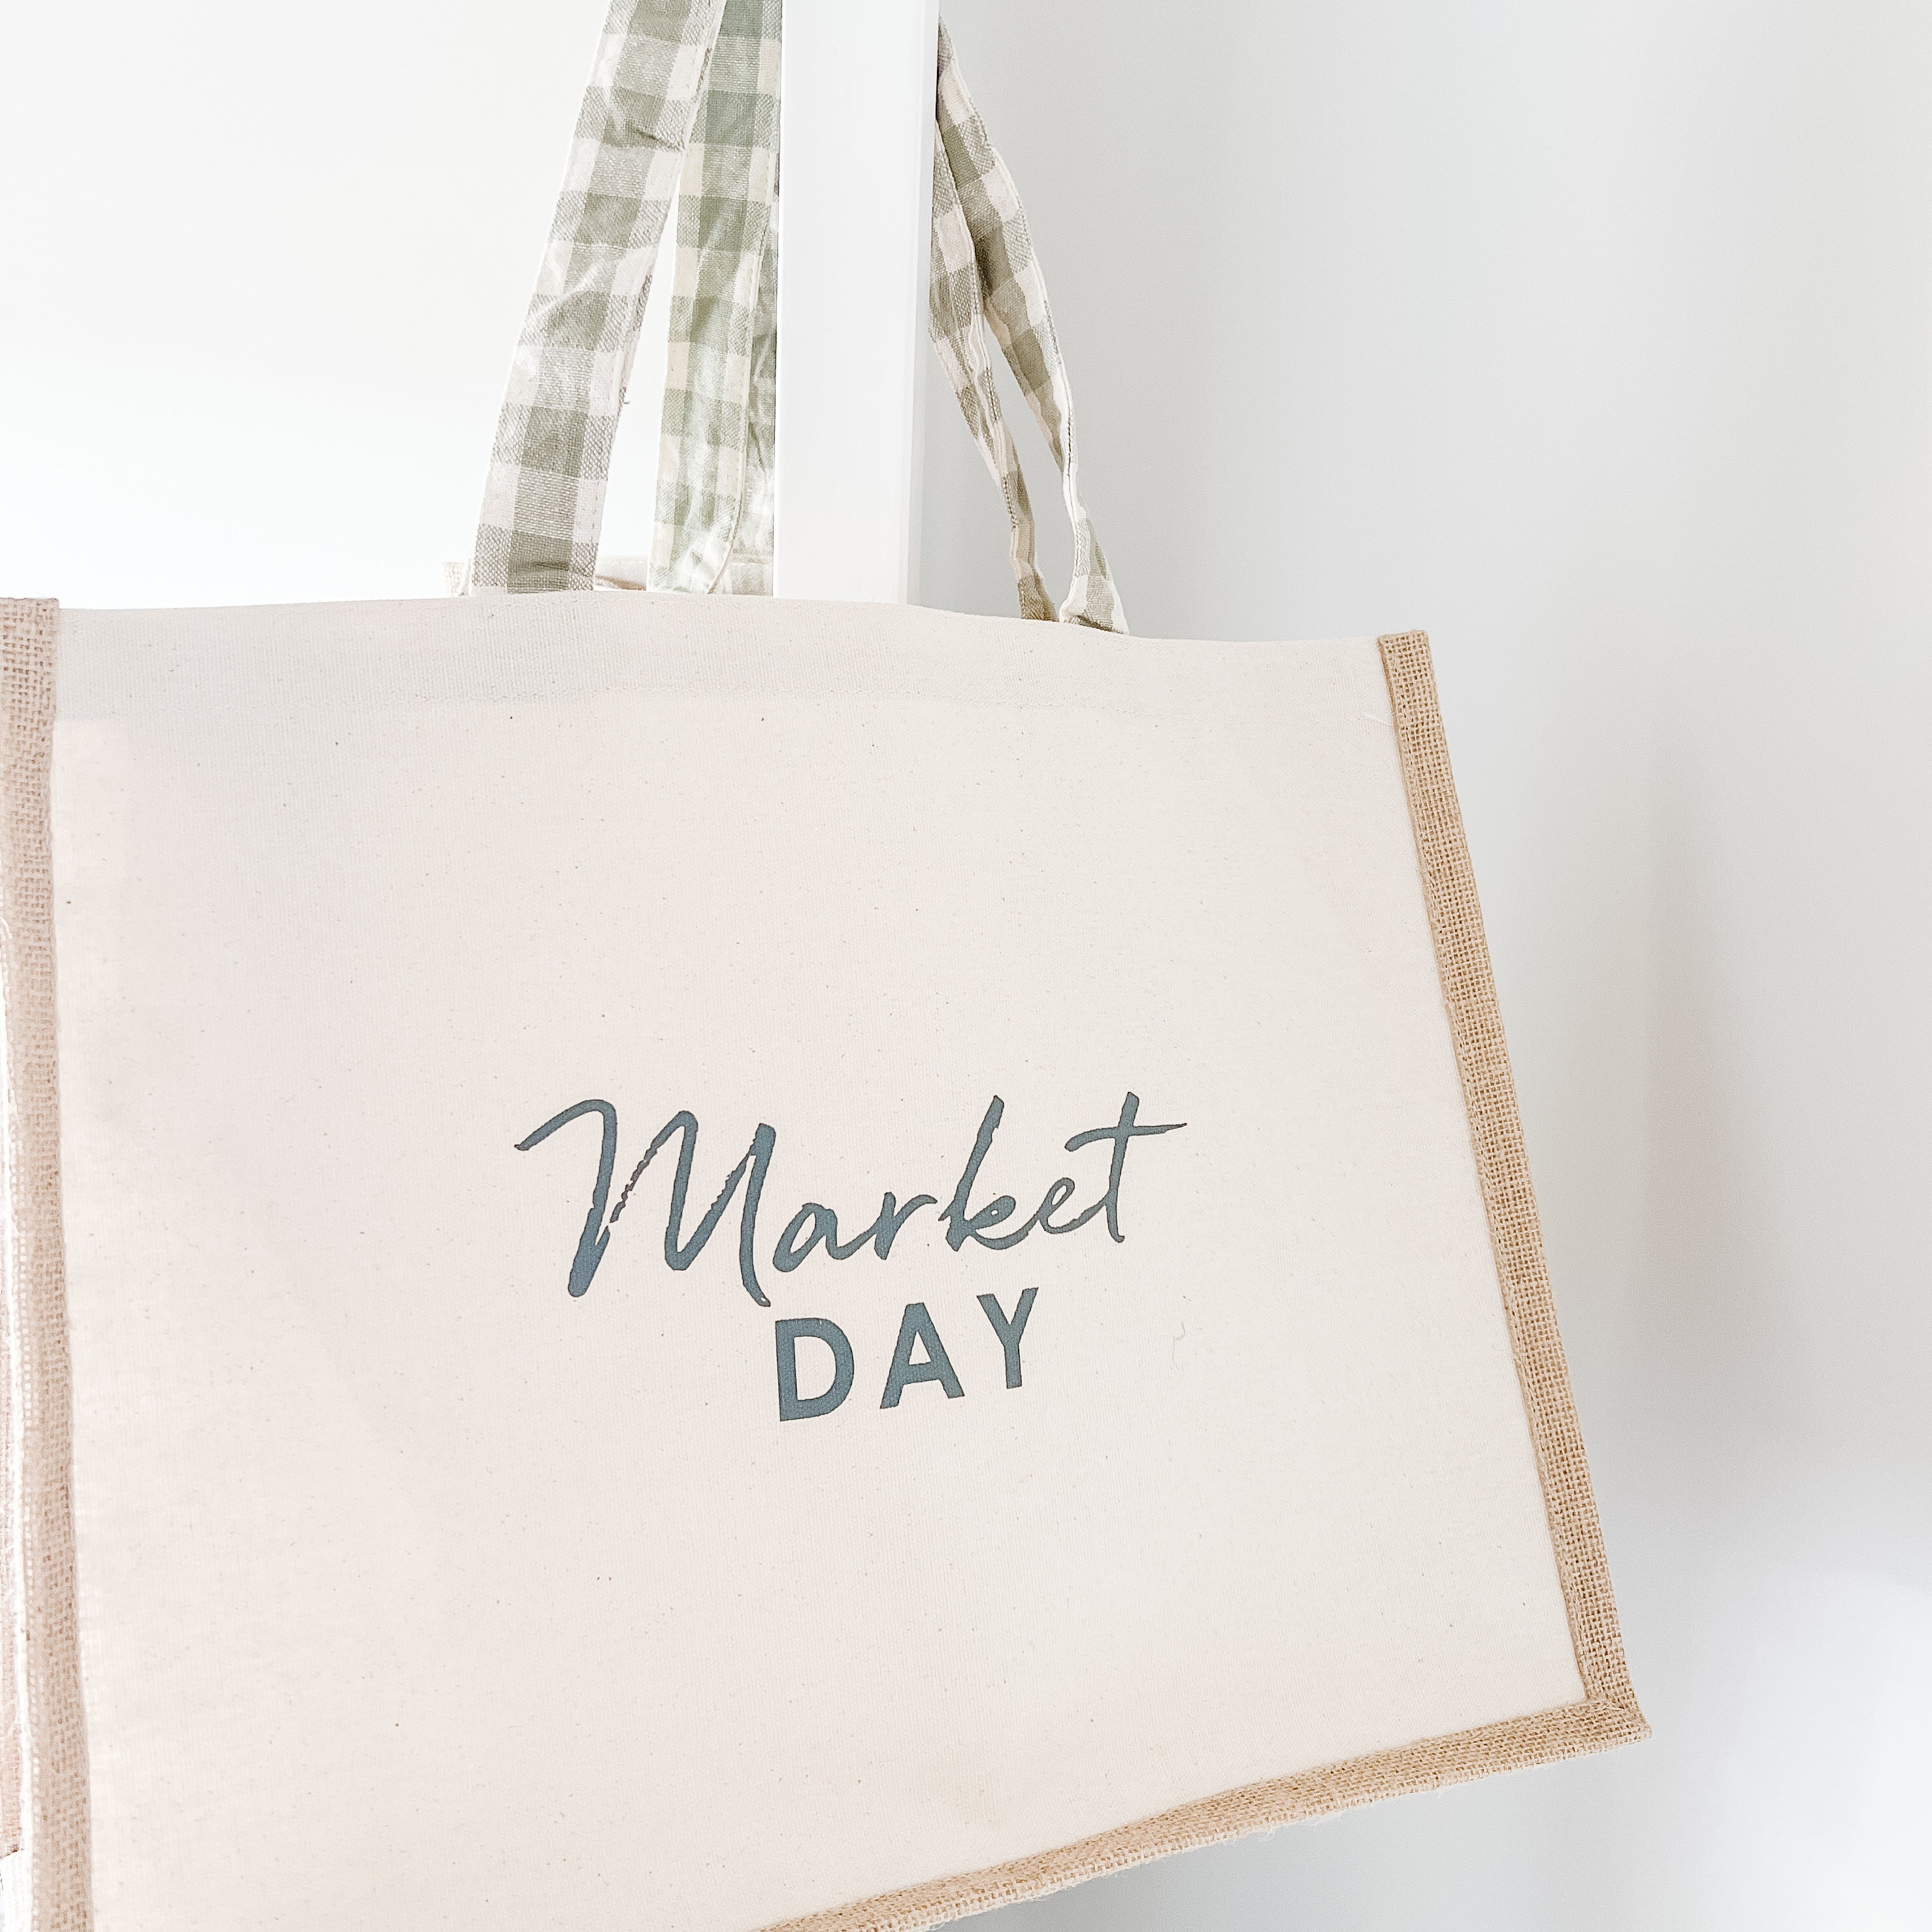 Market Day Shopping Tote